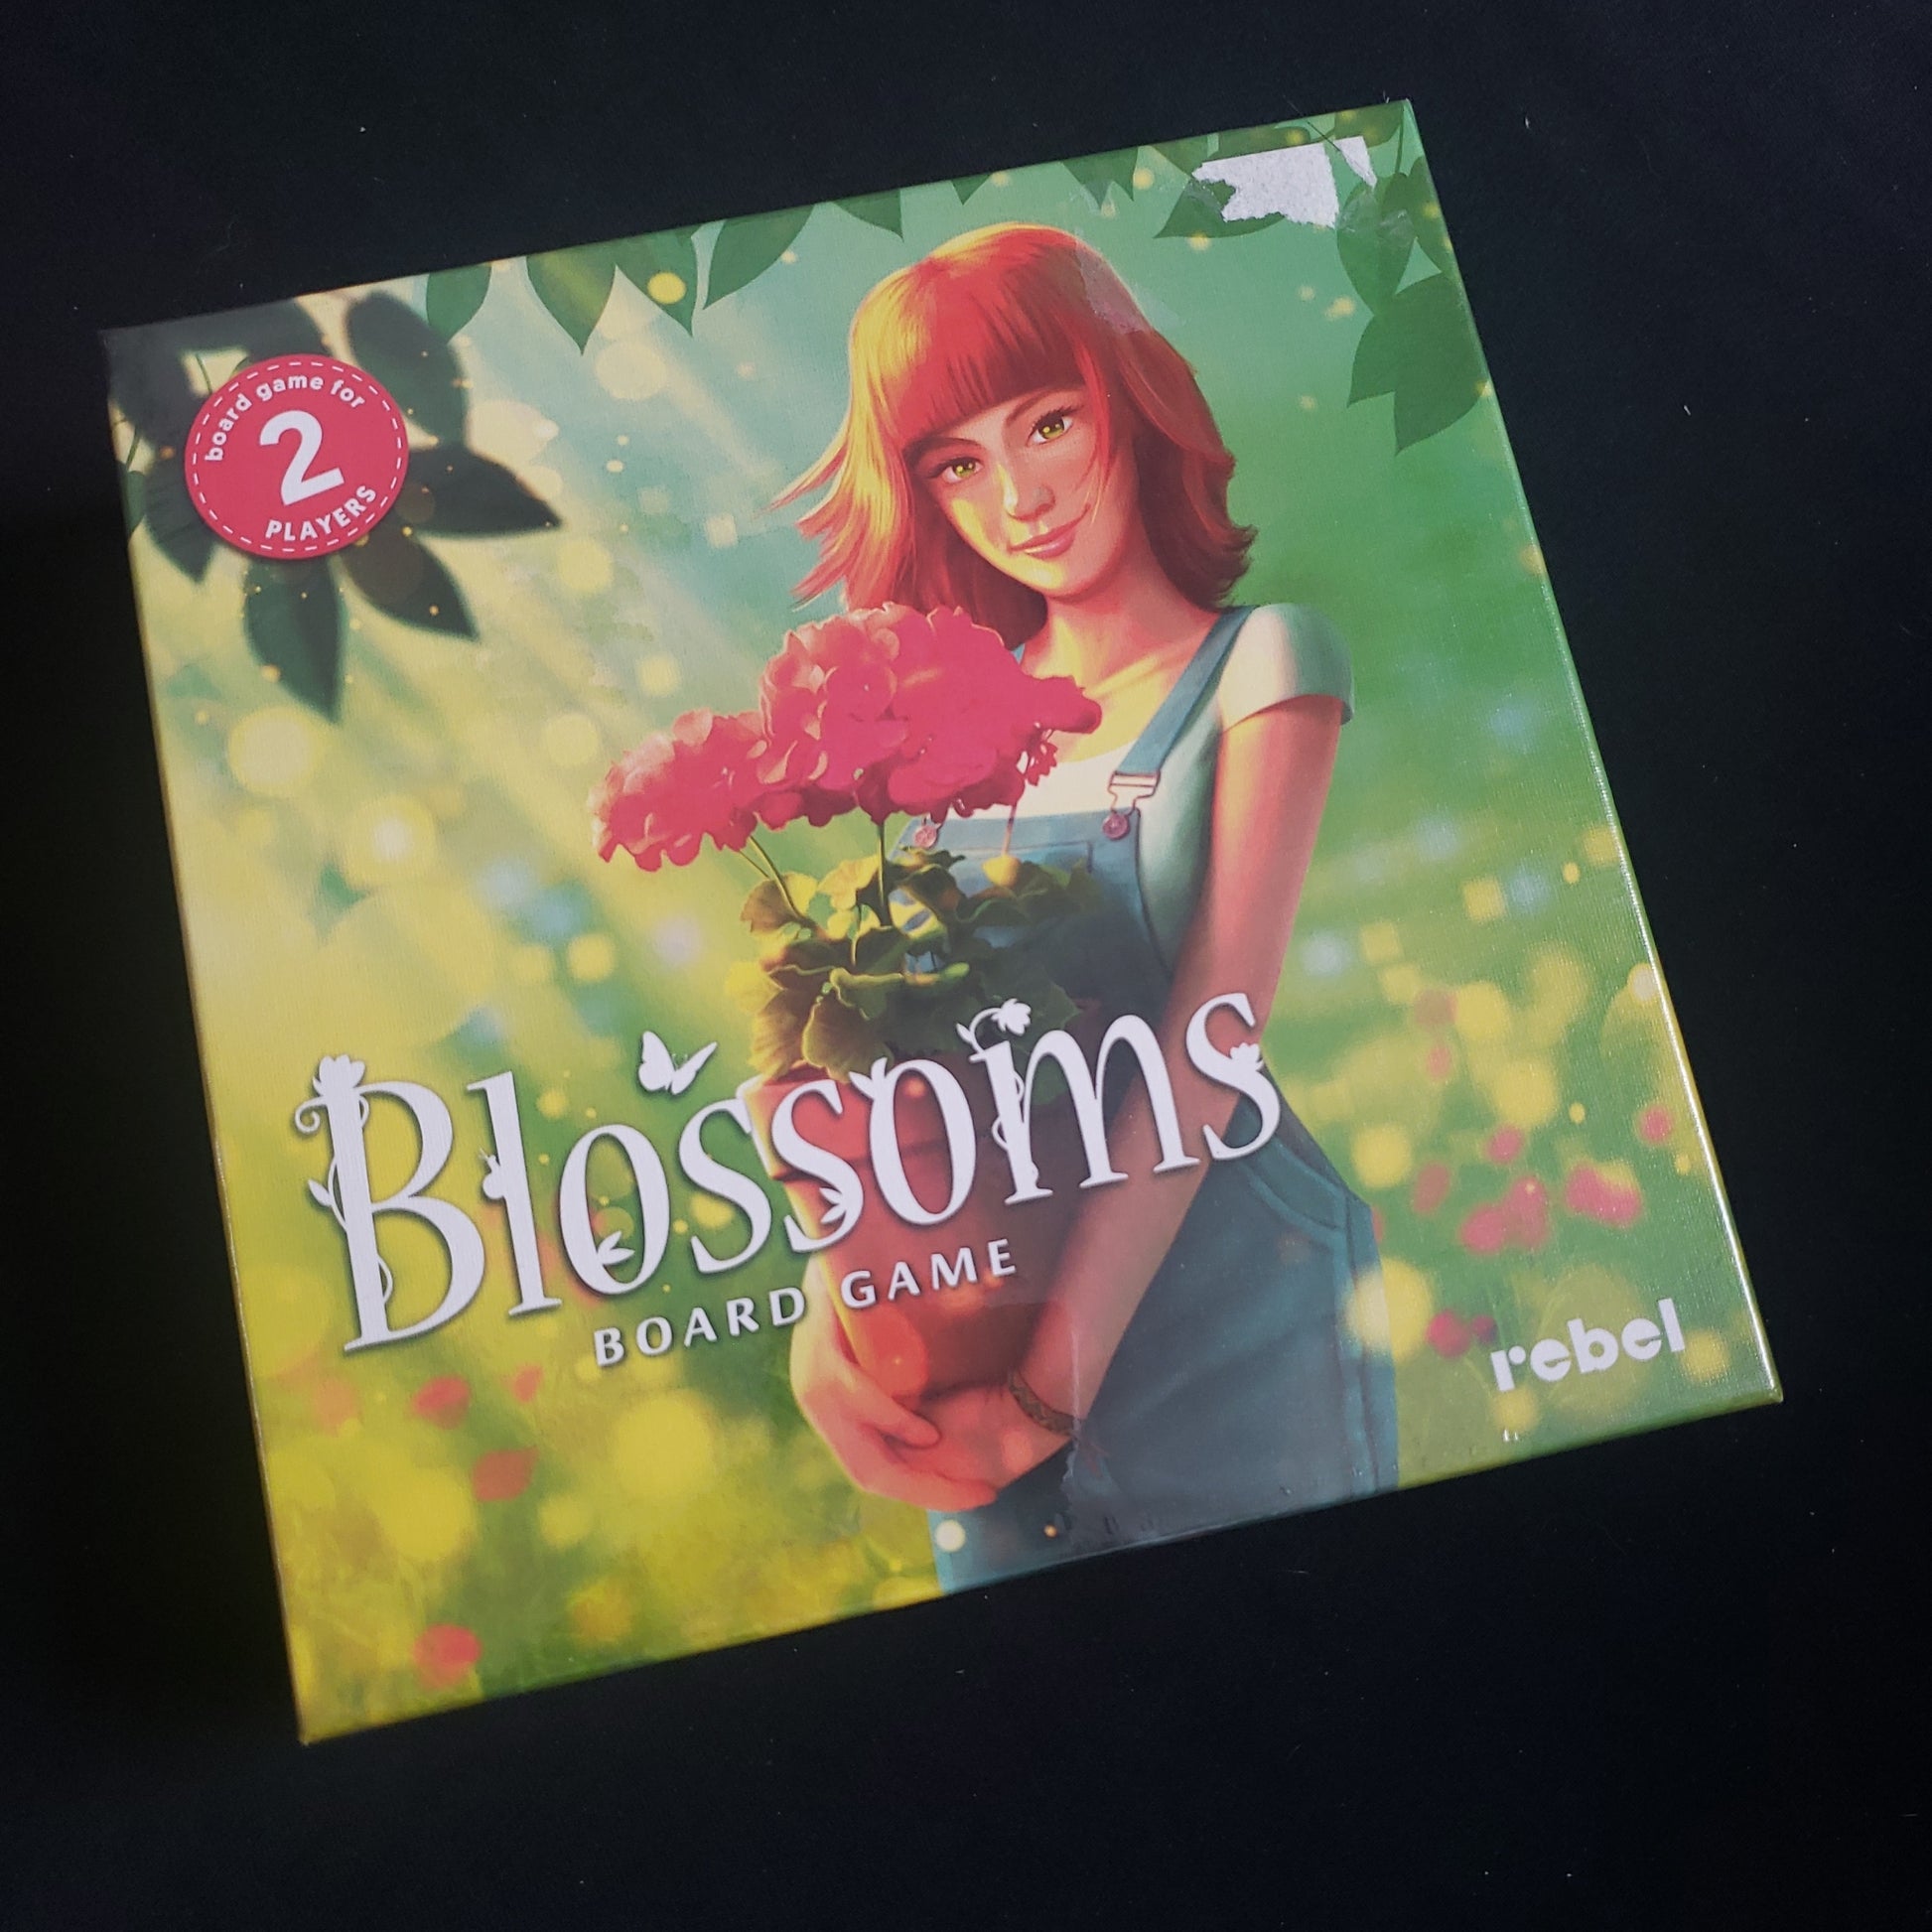 Image shows the front cover of the box of the Blossoms card game